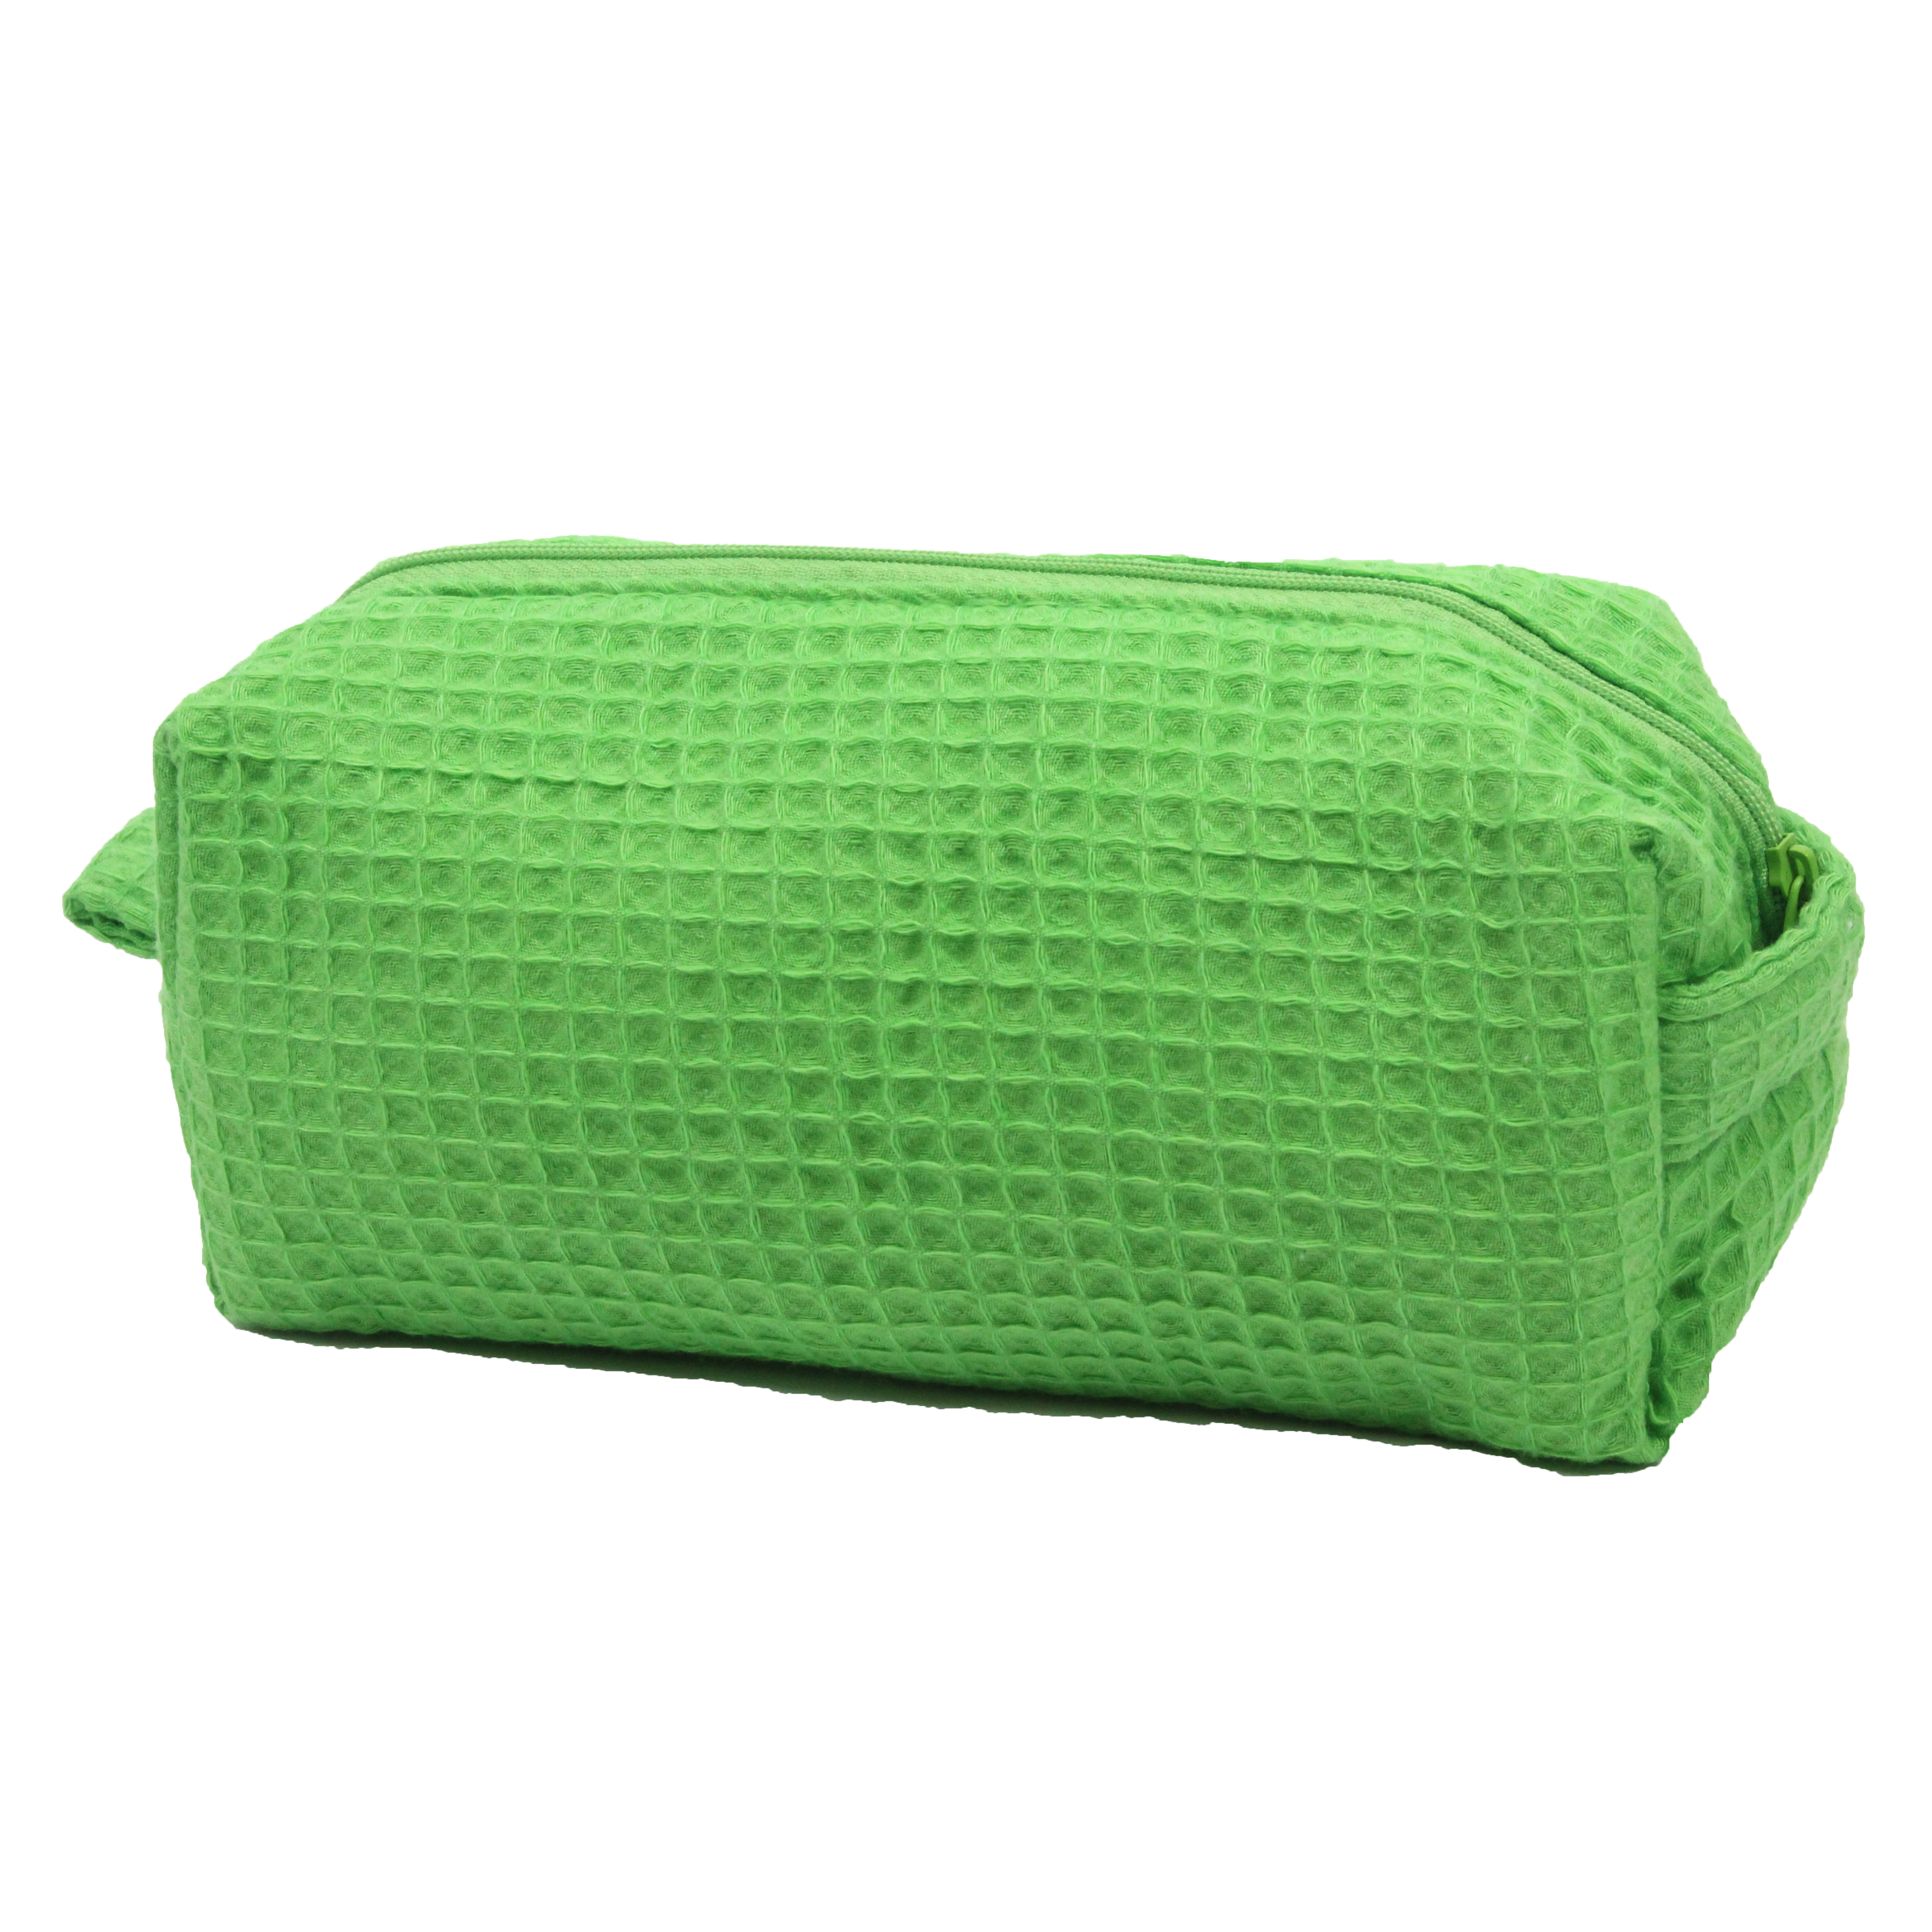 What are the dimensions of the green waffle weave cosmetic bag?